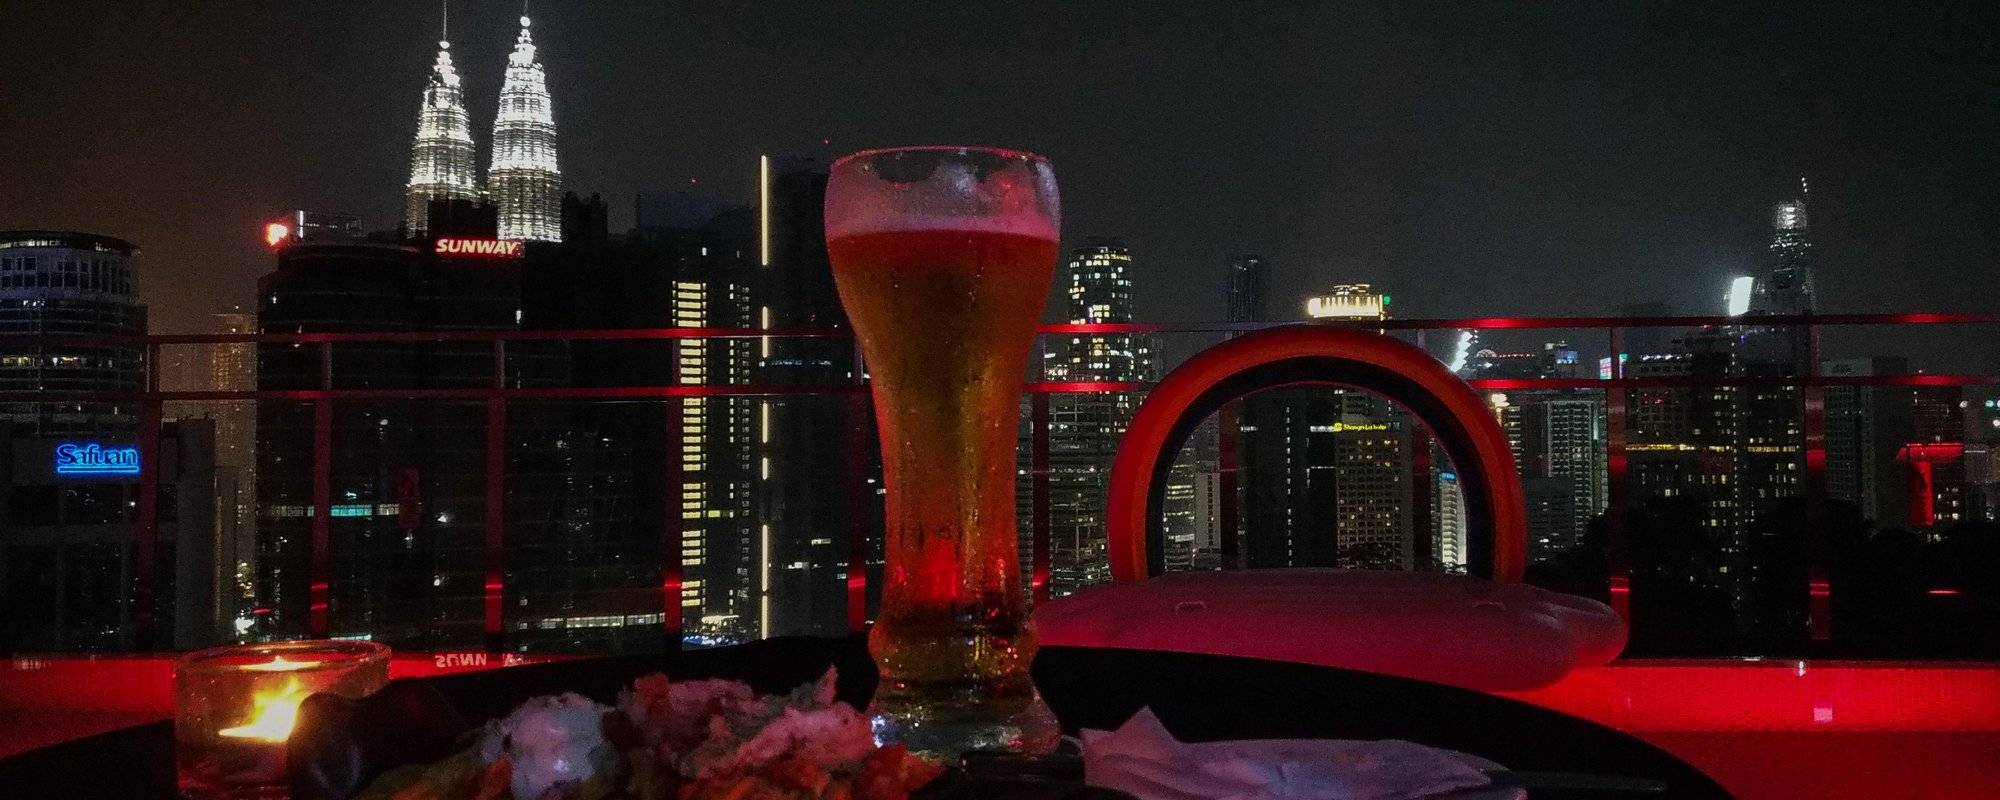 Chillin out at a rooftop bar in KL Malaysia 吉隆坡夜景超讚